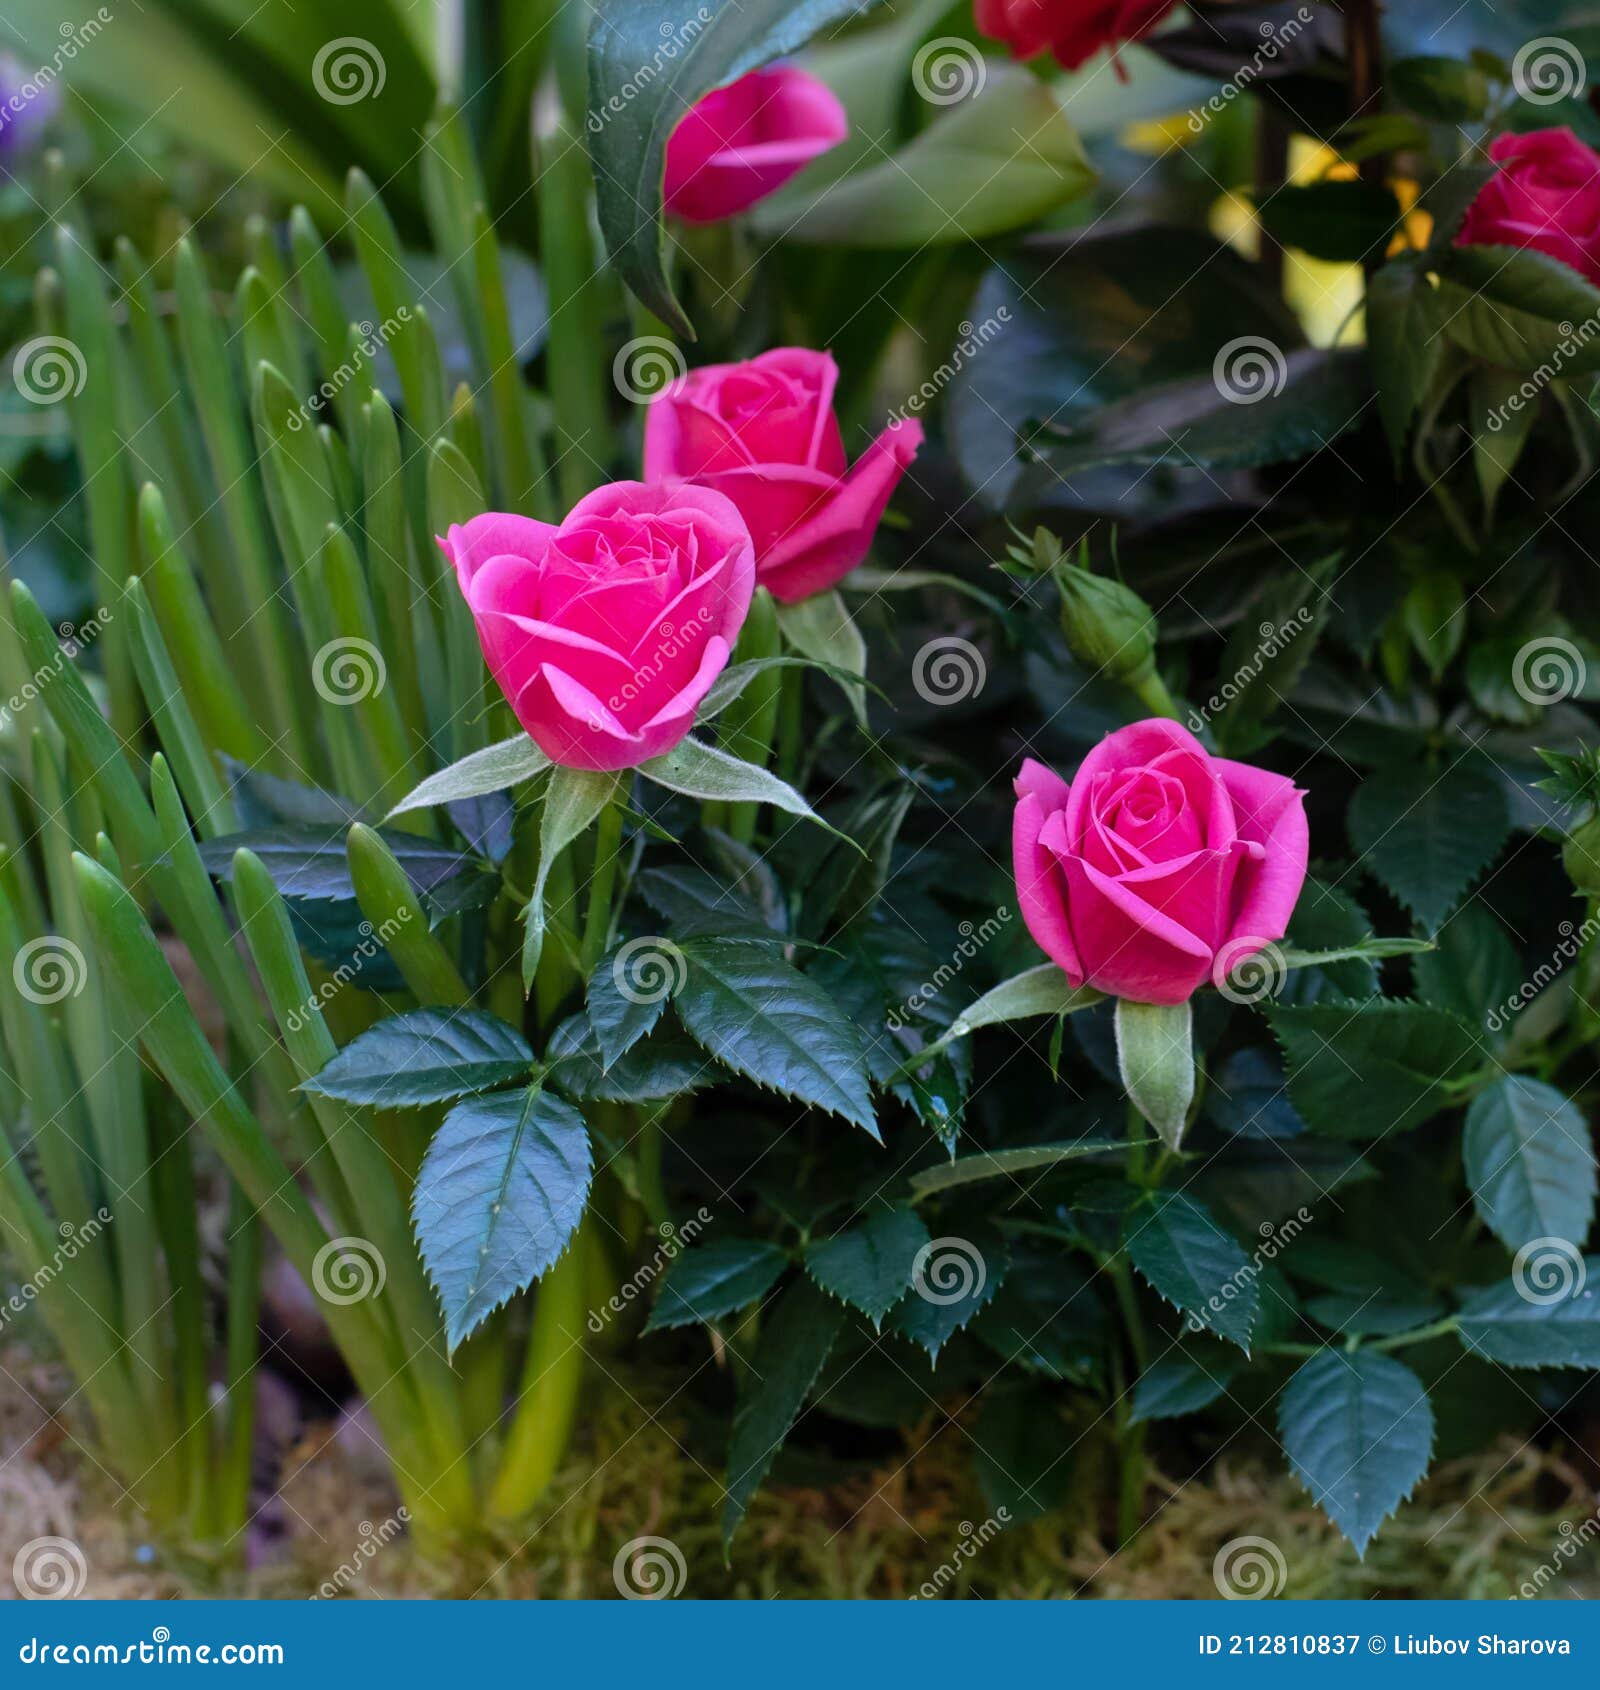 a group of miniature pink roses